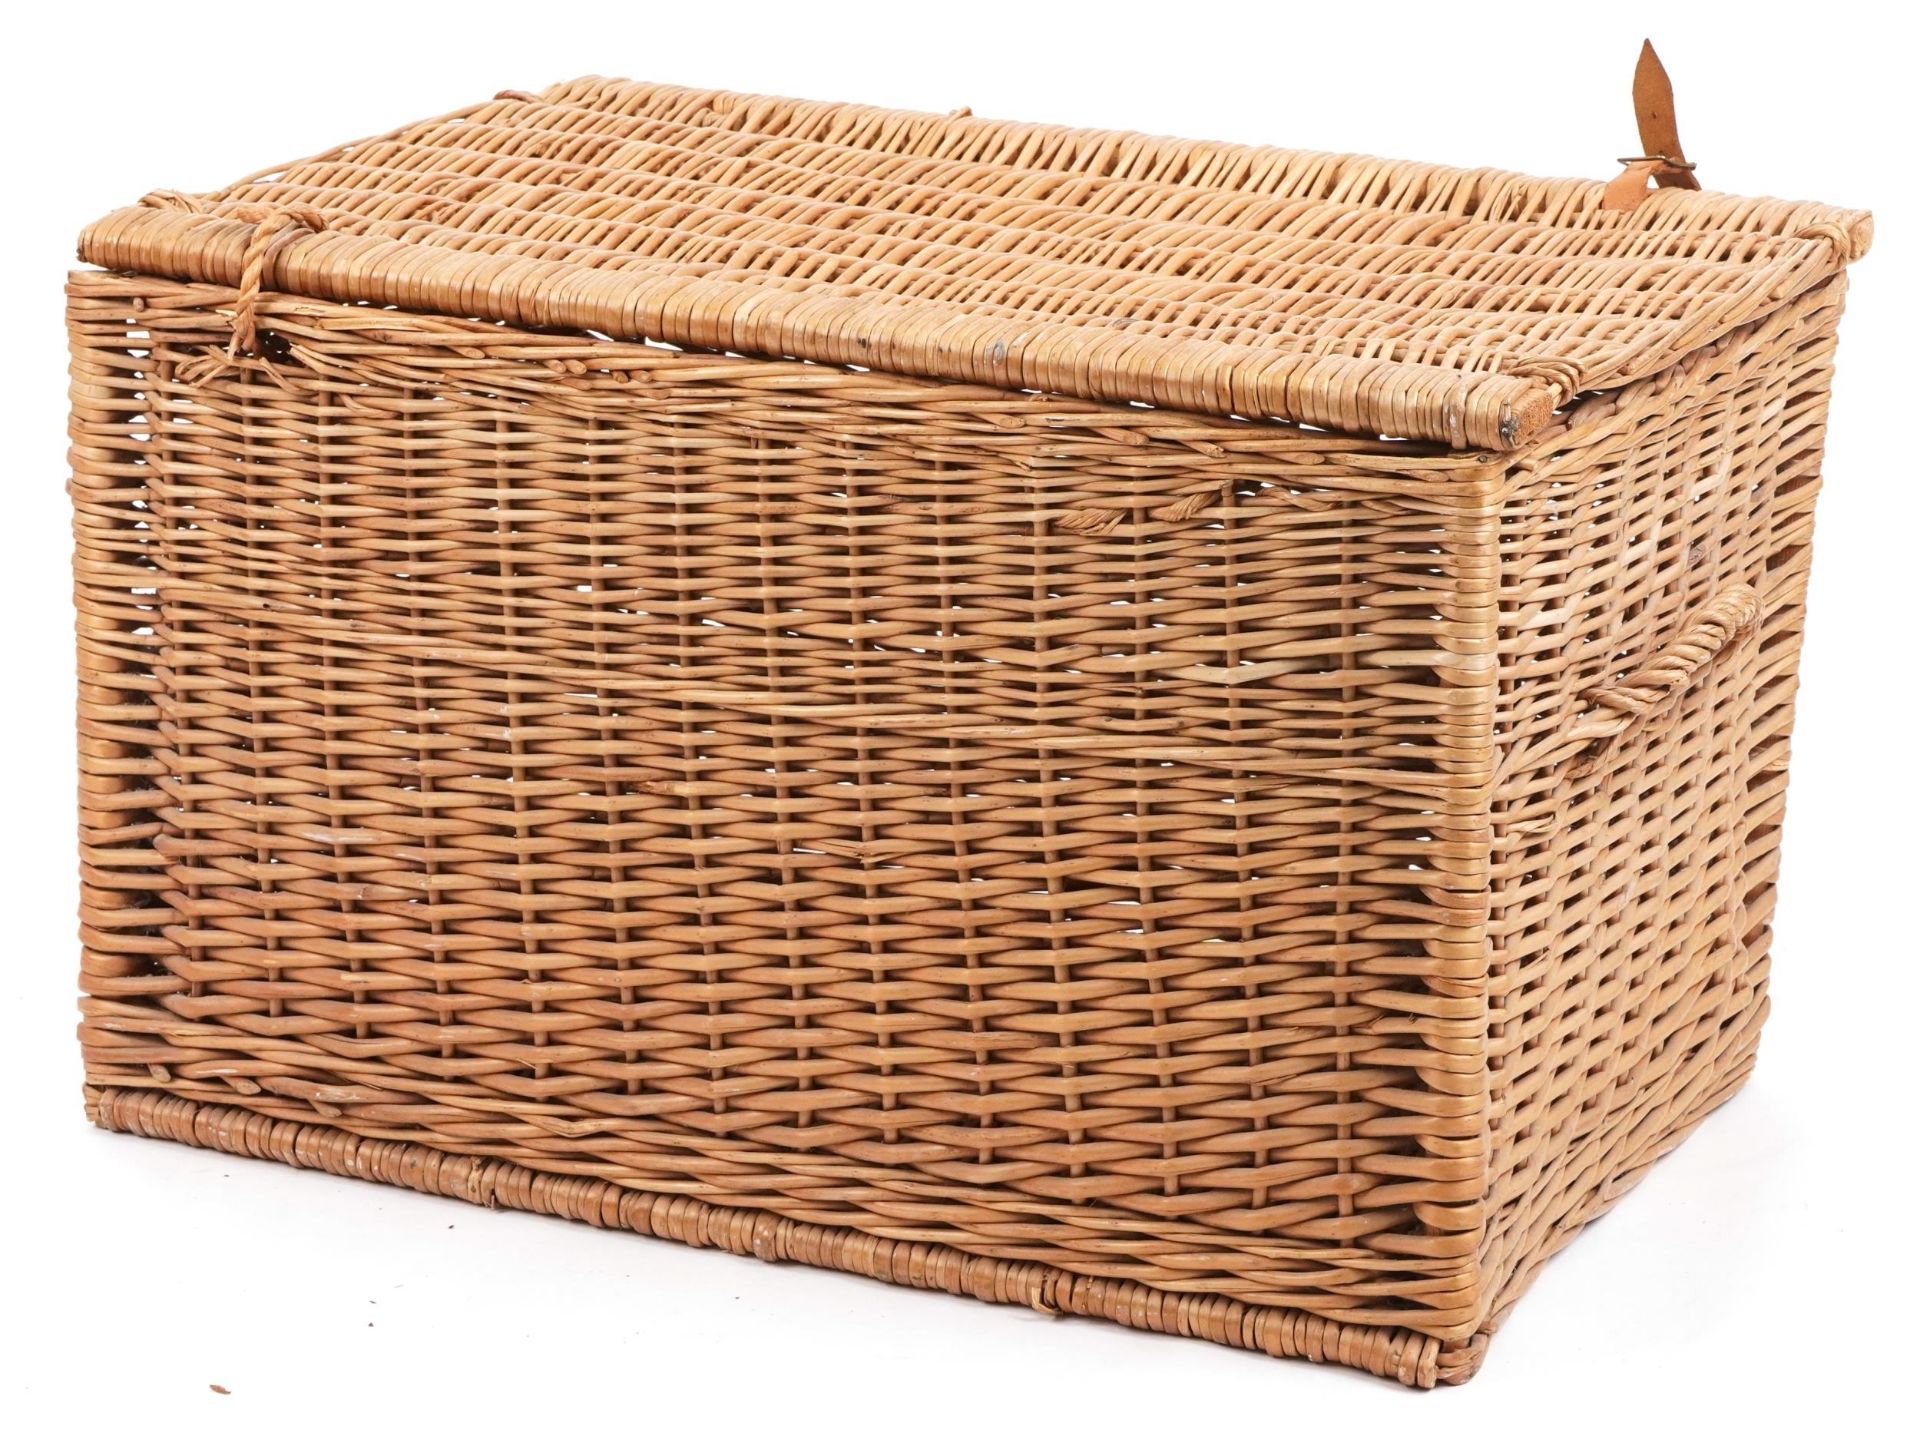 Large Fortnum & Mason wicker hamper, 49cm H x 80cm W x 48cm D : For further information on this - Image 4 of 4